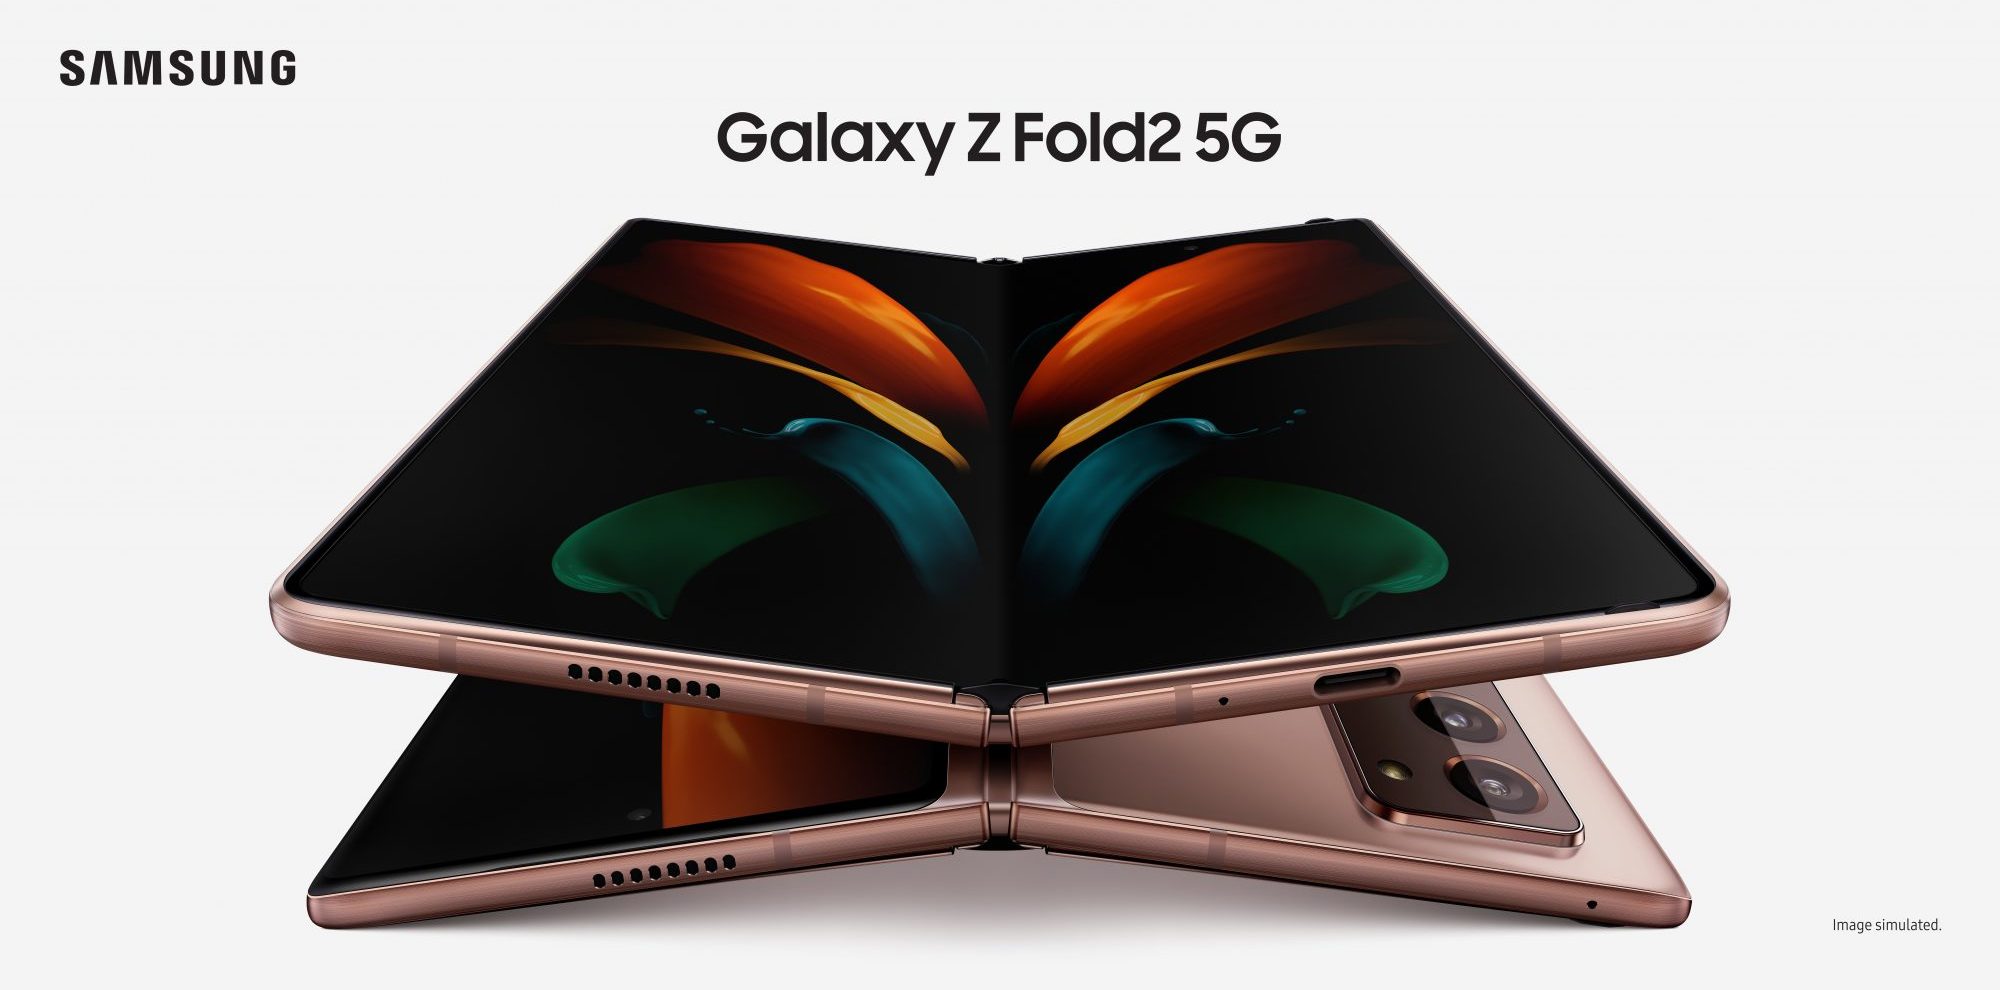 Samsung Revealed the Second Generation of its Foldable-Display Tablet/Phone